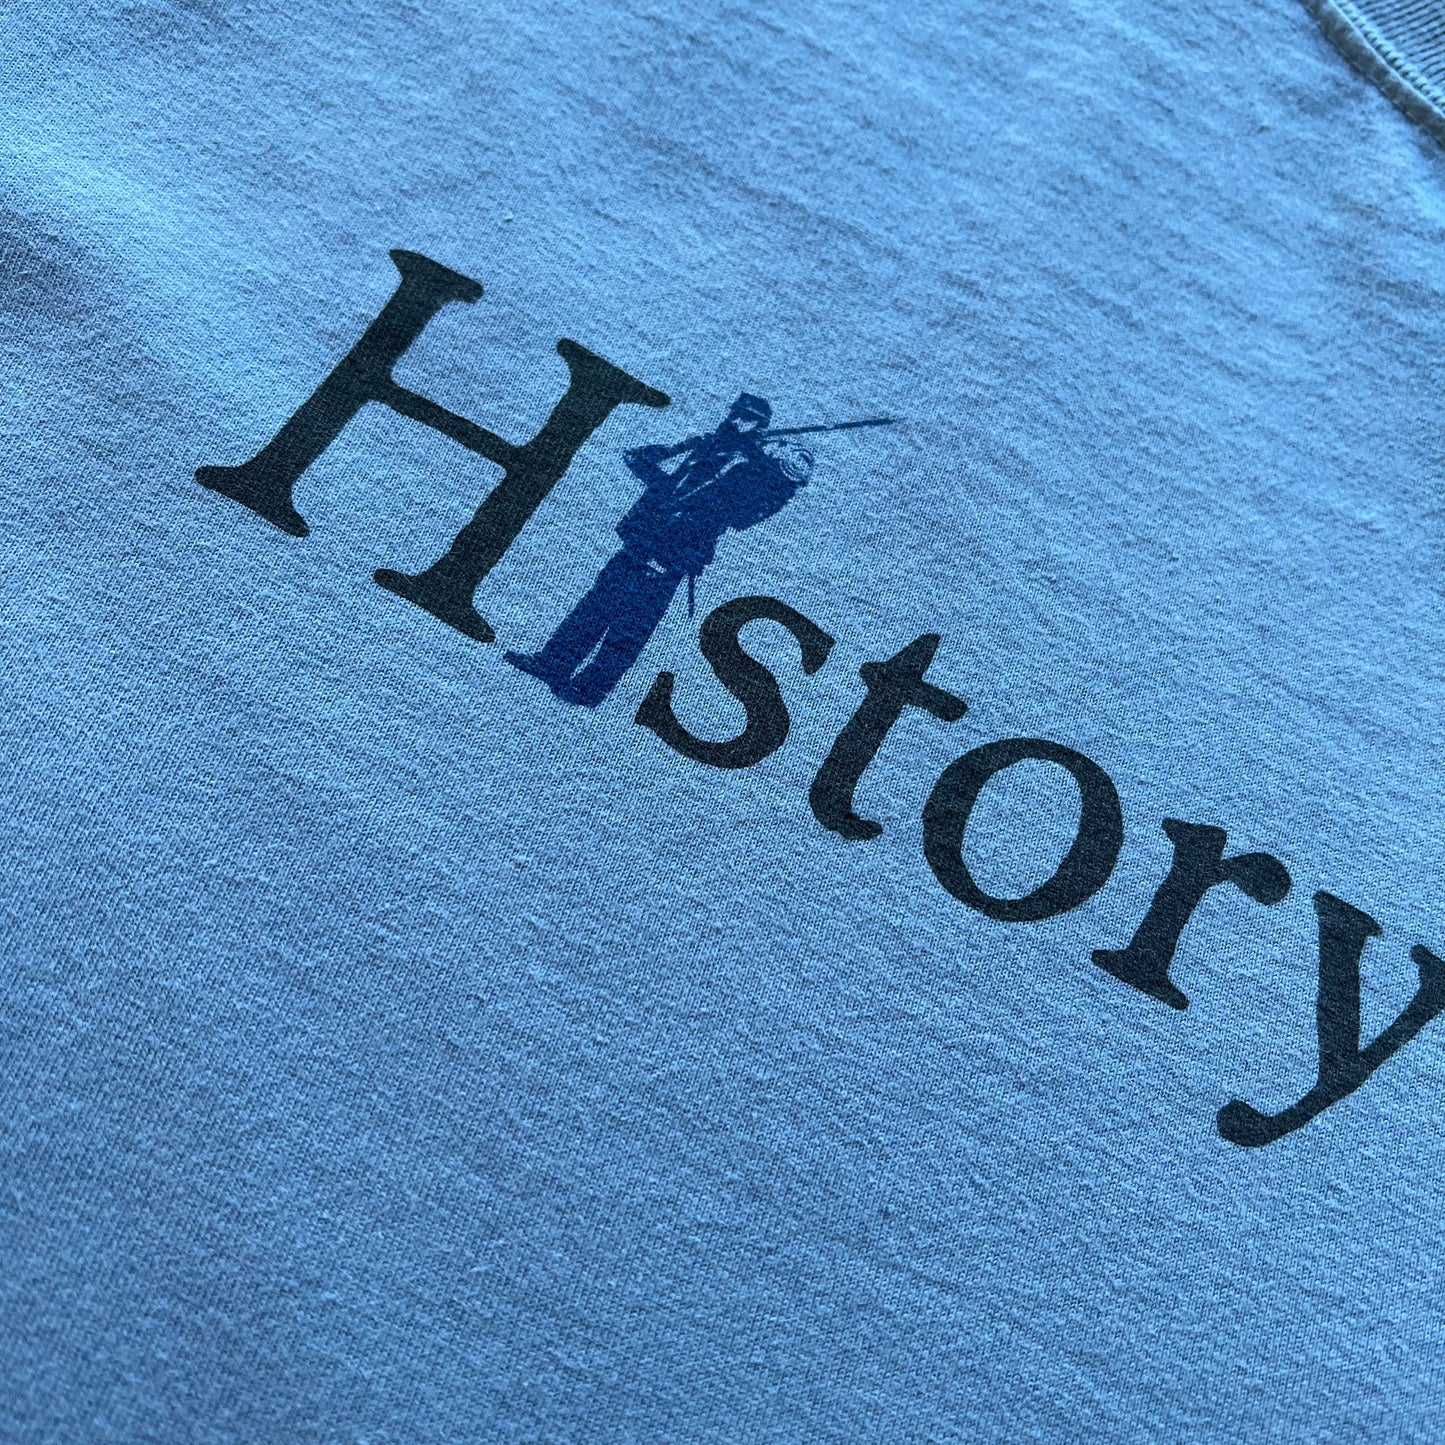 Close-up of Civil War "History Nerd" Shirt in Saltwater blue from The History List store